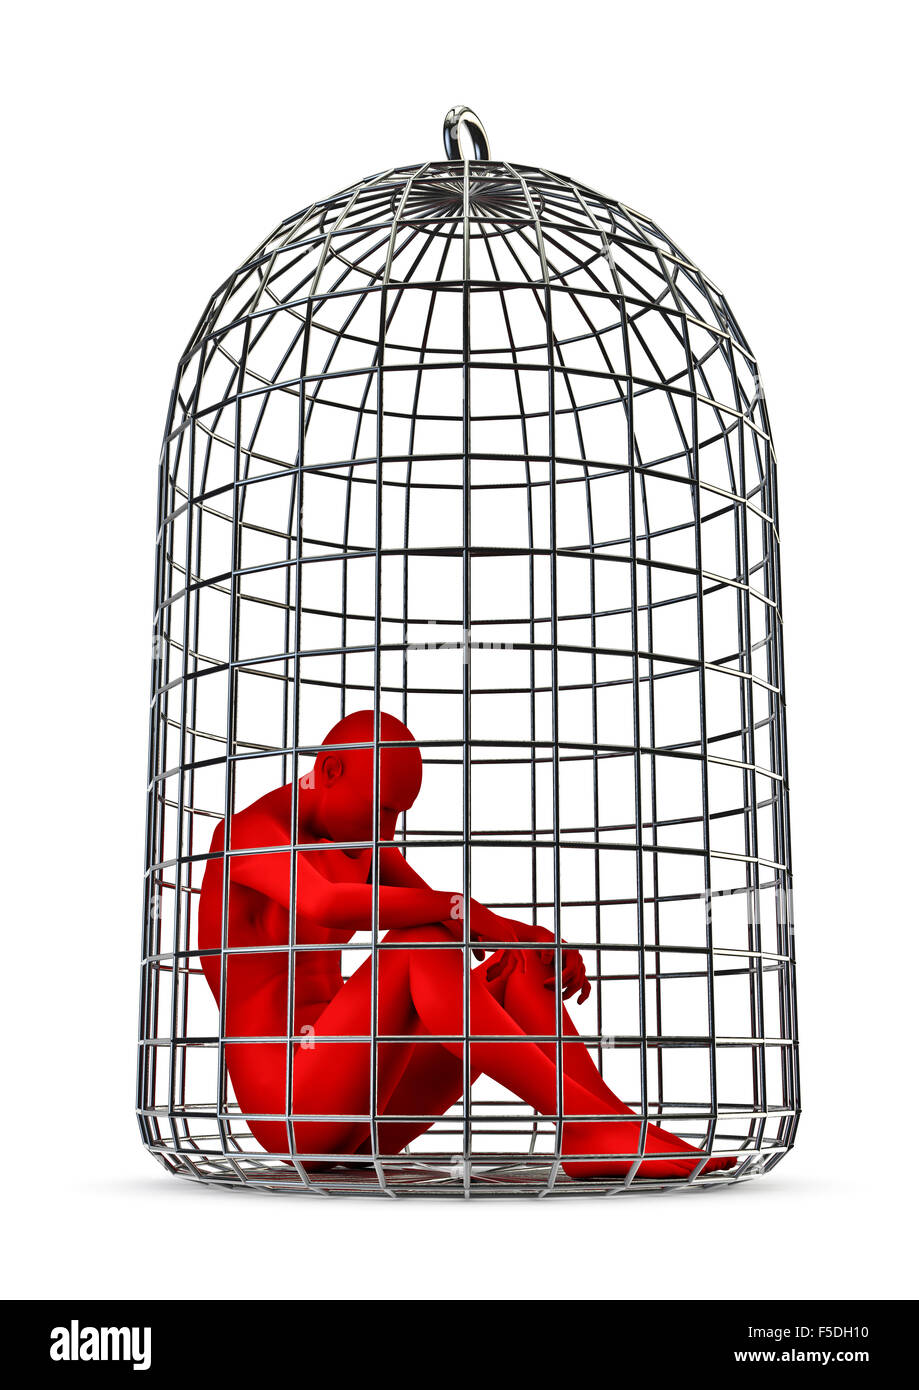 Jailbird / 3D render of male figure trapped in birdcage Stock Photo